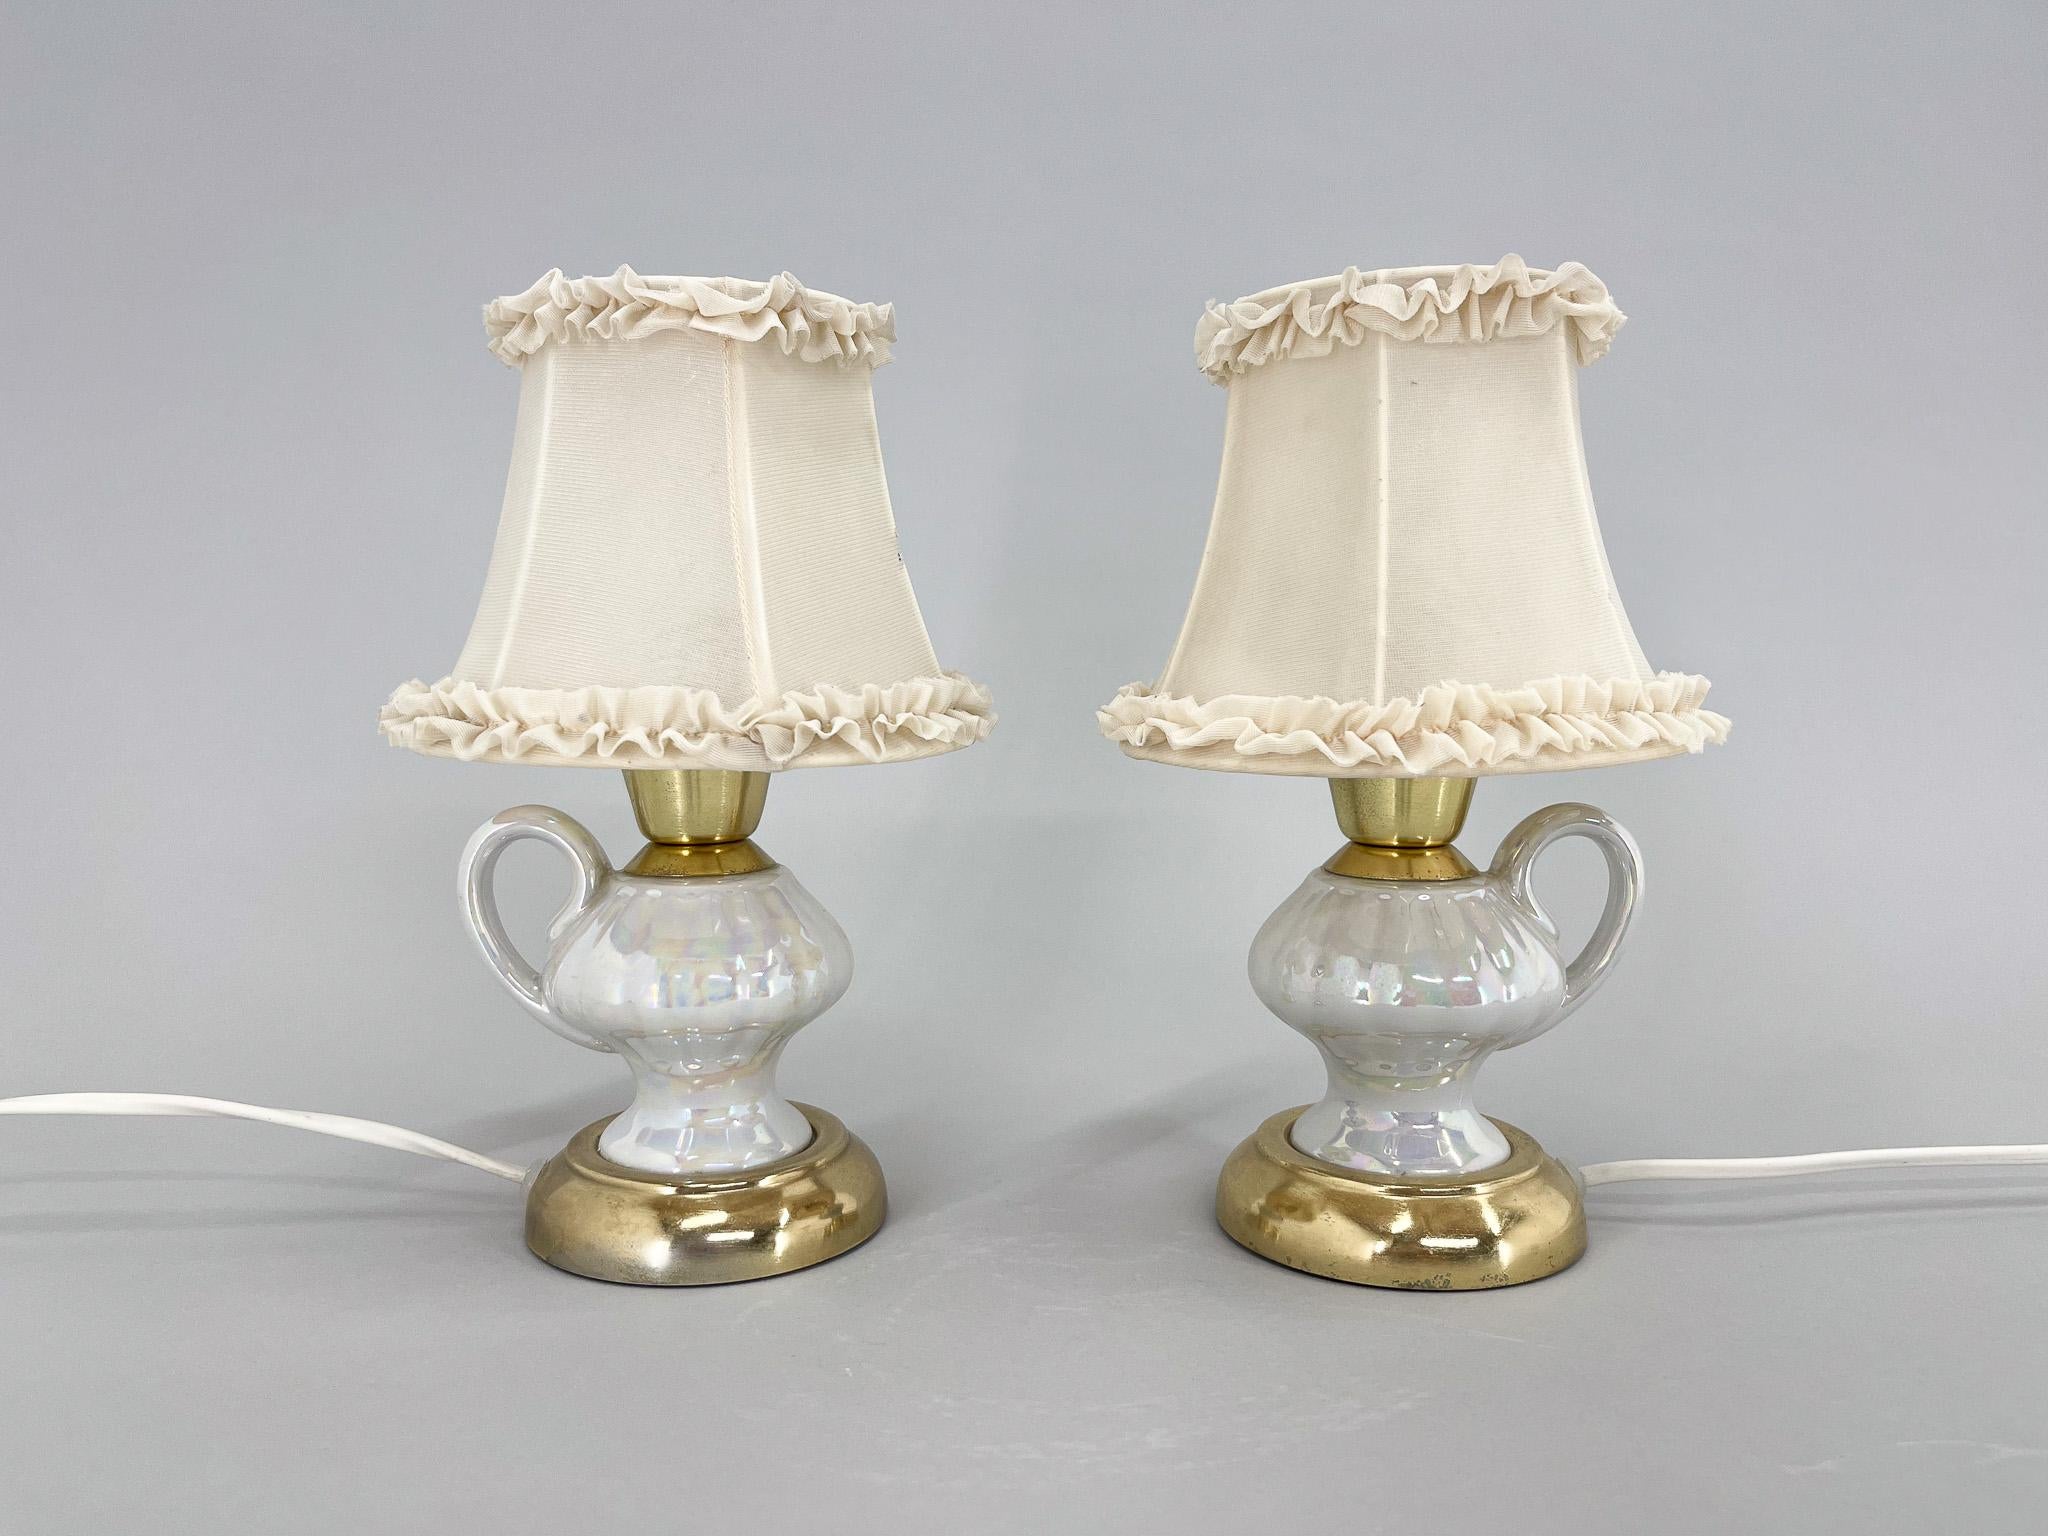 Vintage unusual bedside or table lamps made of ceramic in the shape of a tea cup, metal and fabric lamp shade. Original, fully functional wiring.